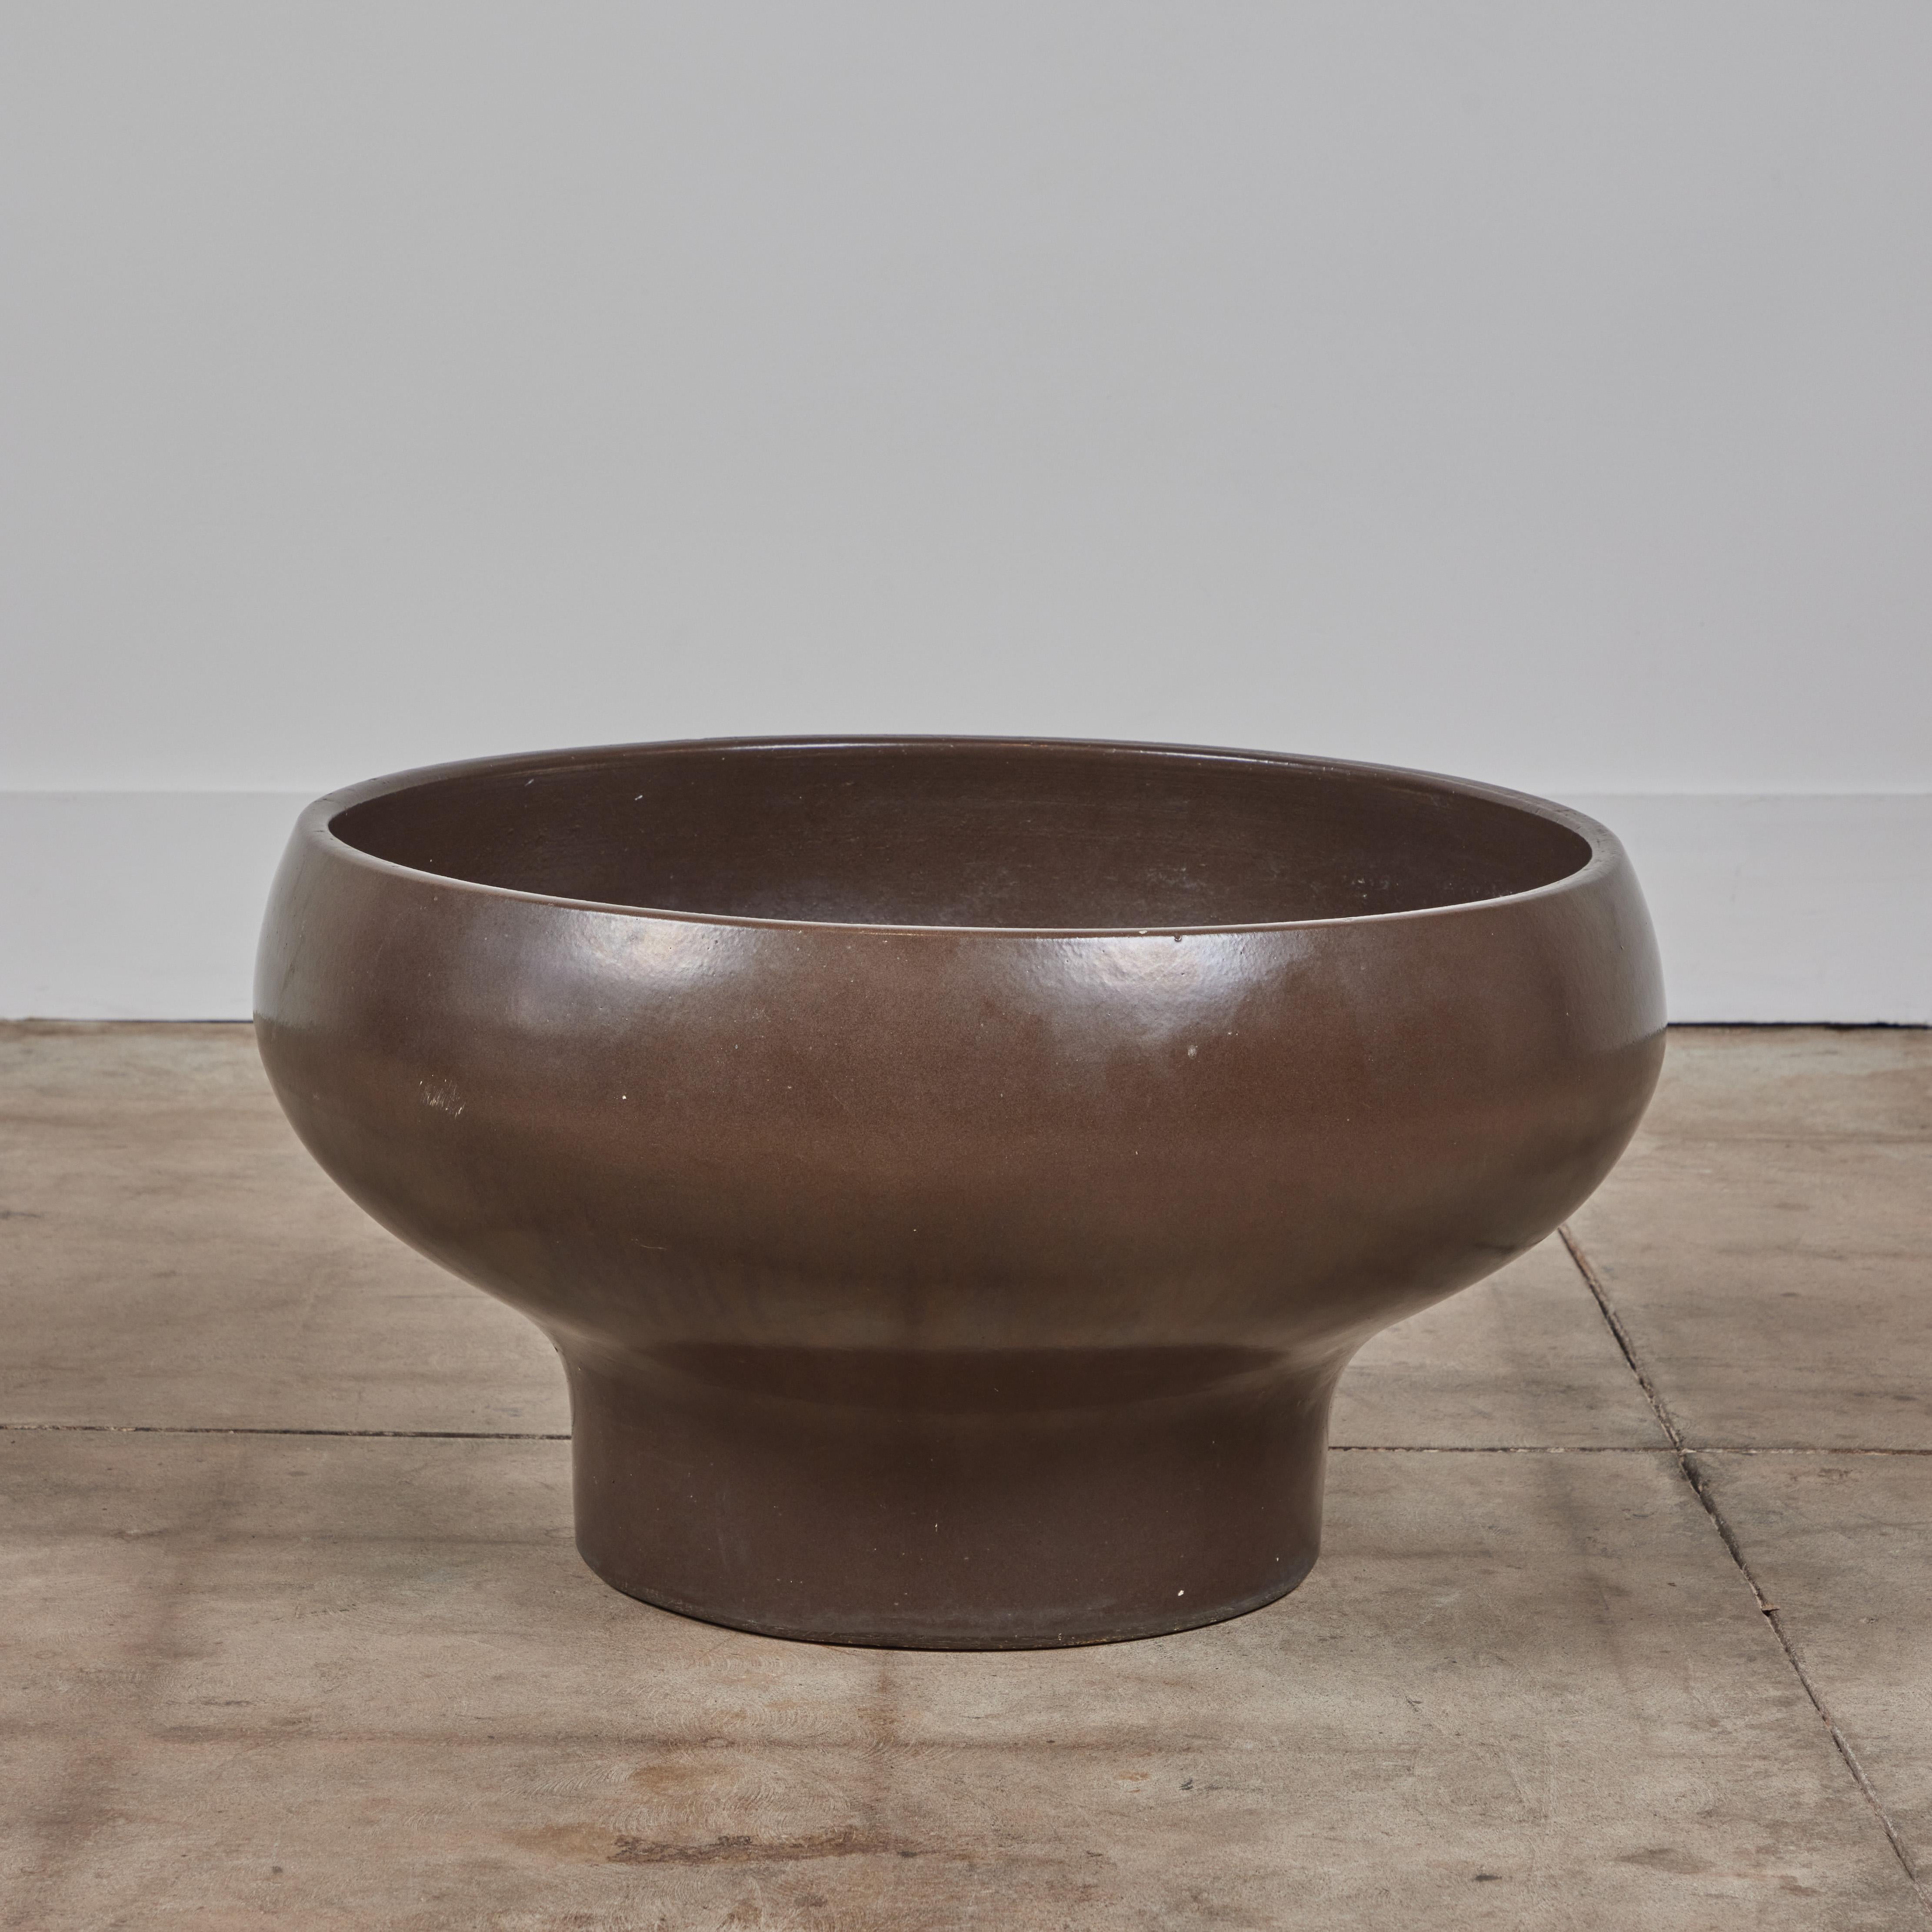 Ceramic planter from David Cressey's Pro/Artisan collection for Architectural Pottery. The 4066 pedestal bowl planter has a wide belly that tapers at the base with a mocha glazed exterior and interior.

Dimensions
22.75